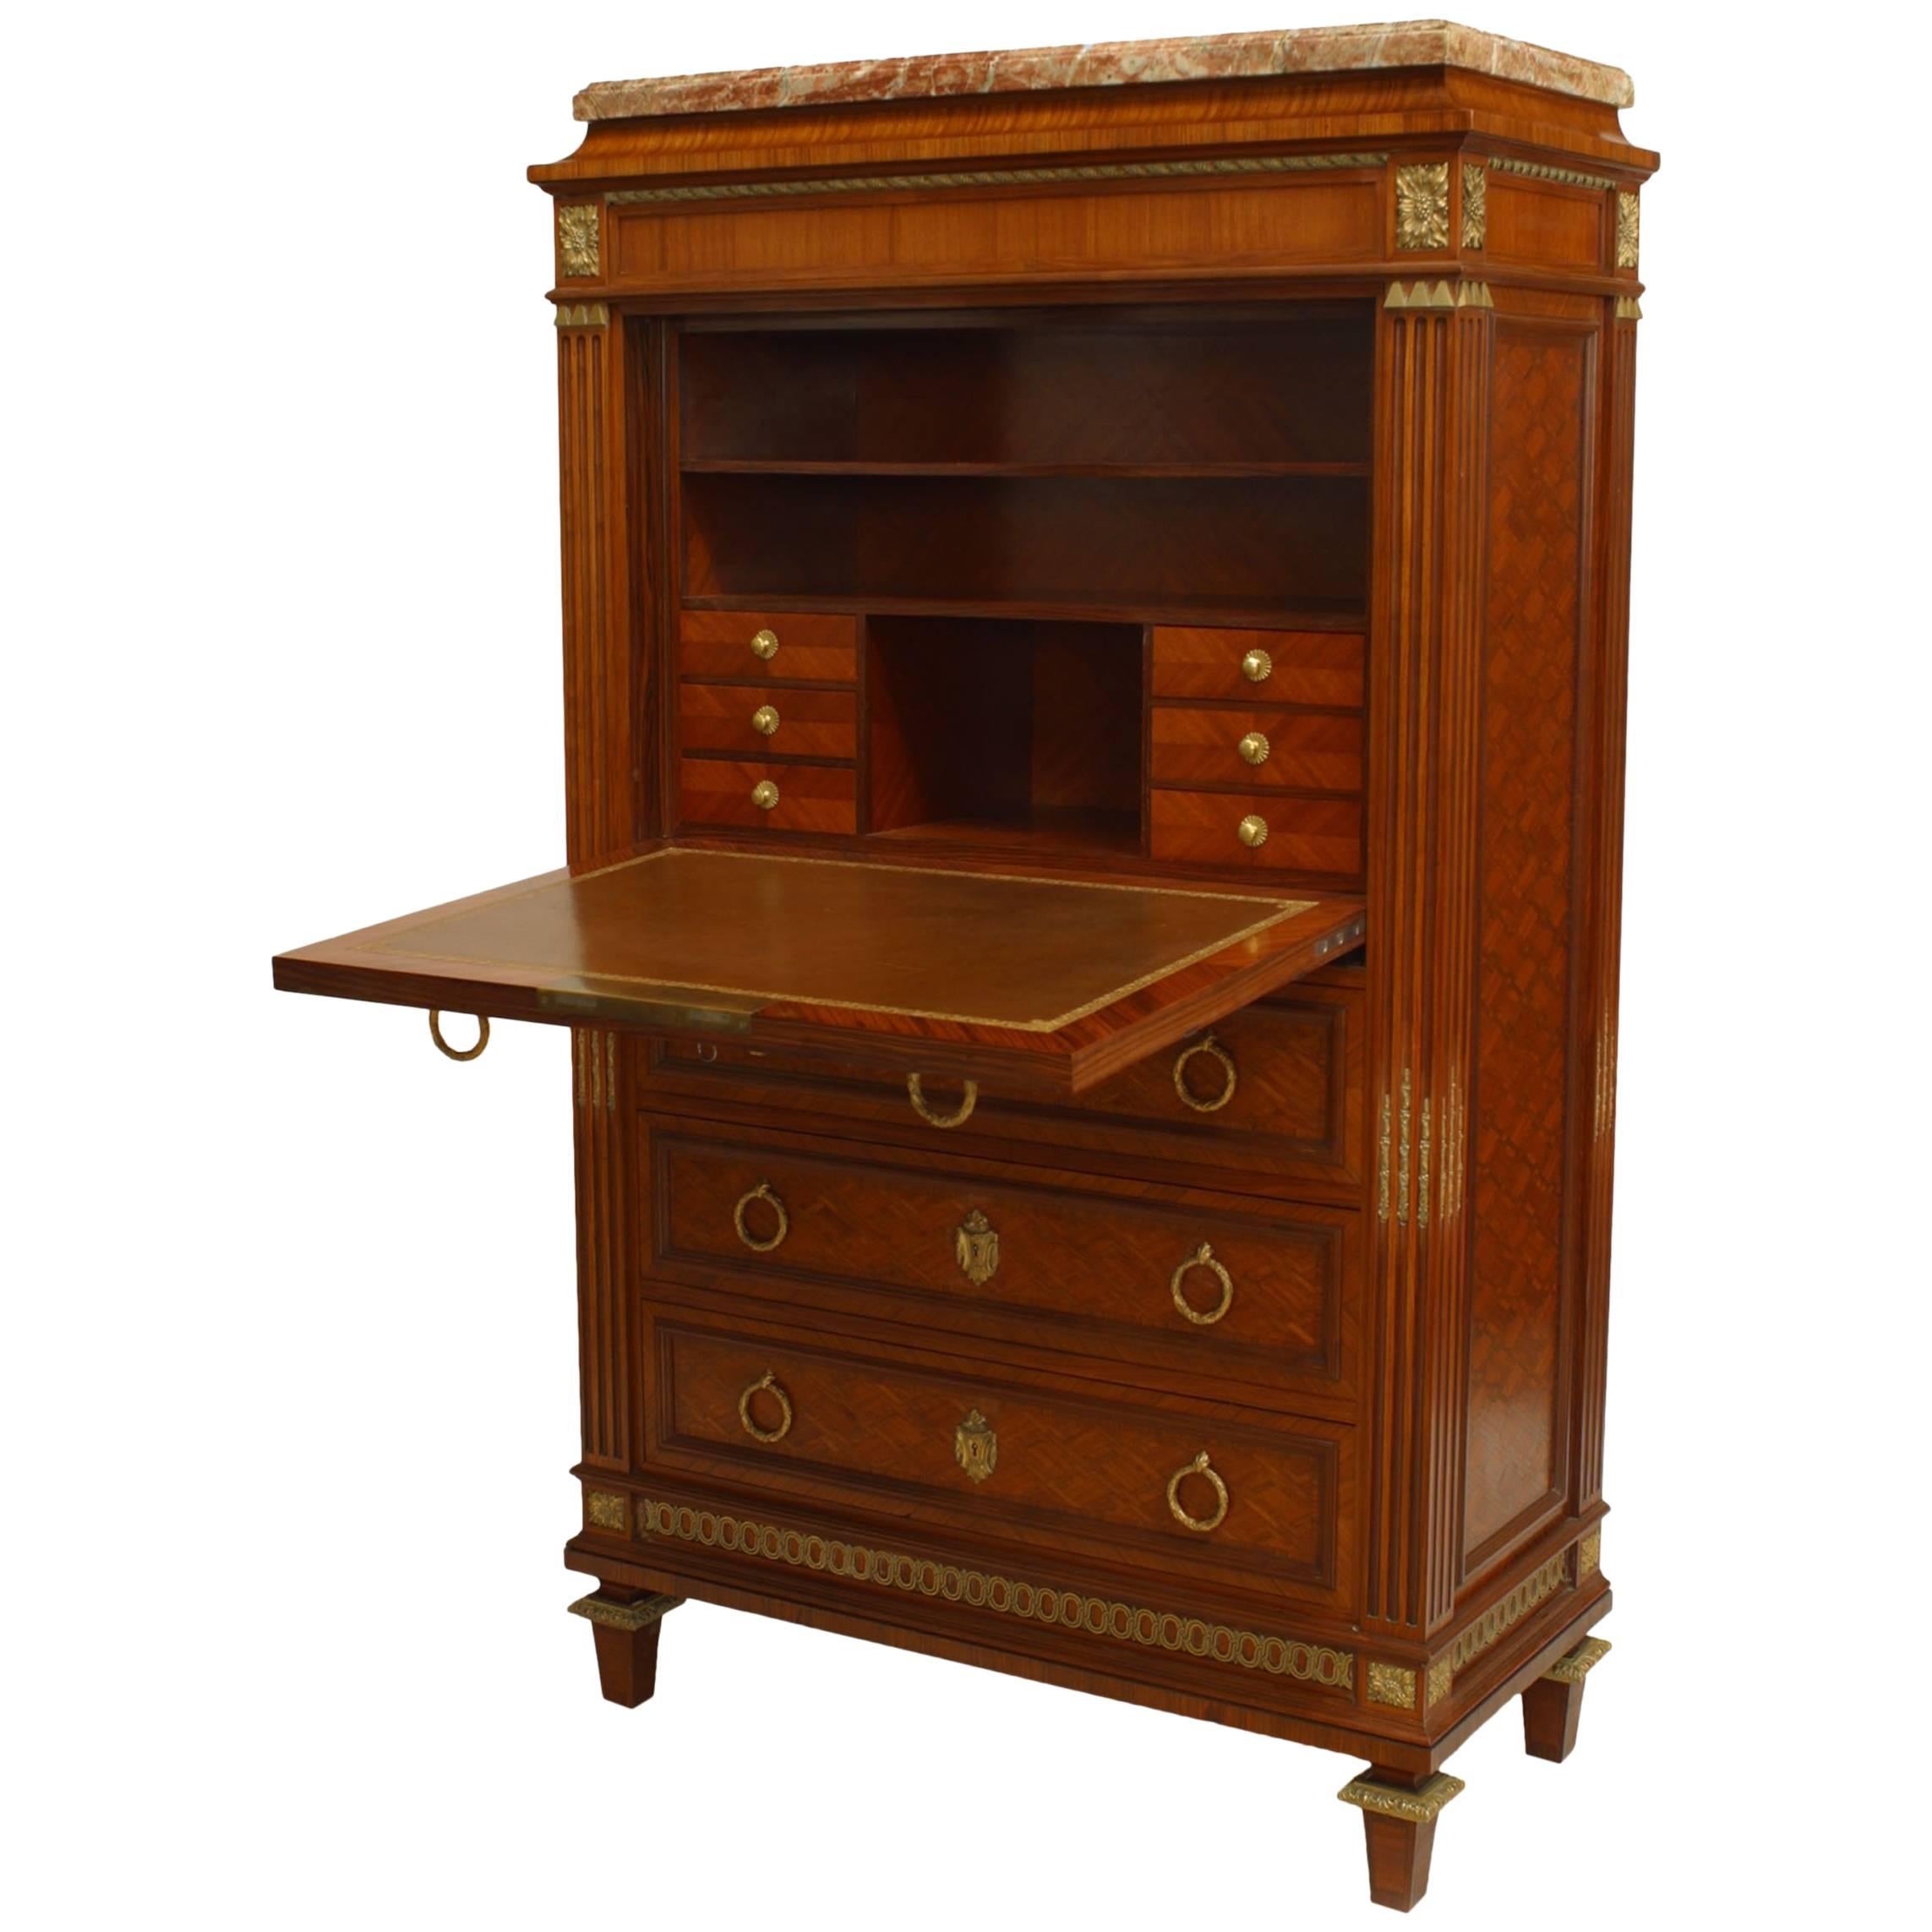 French Louis XVI Style 19th Century Parquetry Inlaid Drop Front Secretary